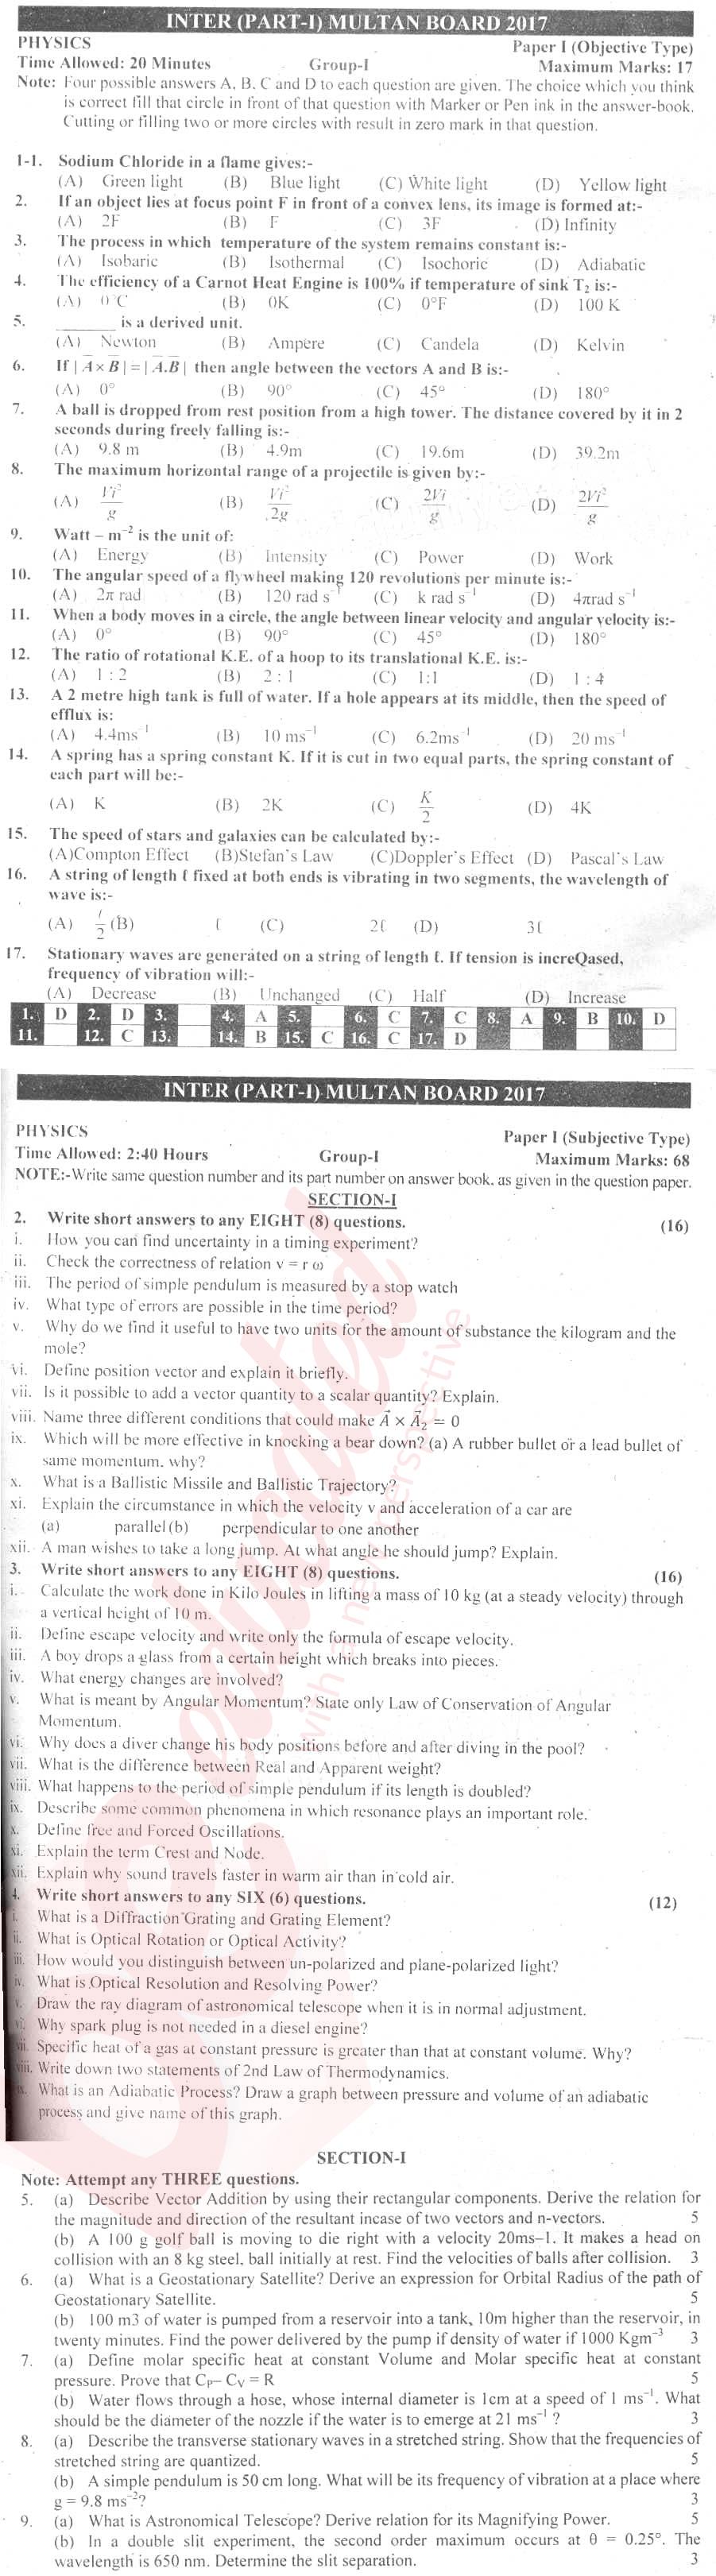 Physics 11th class Past Paper Group 1 BISE Multan 2017